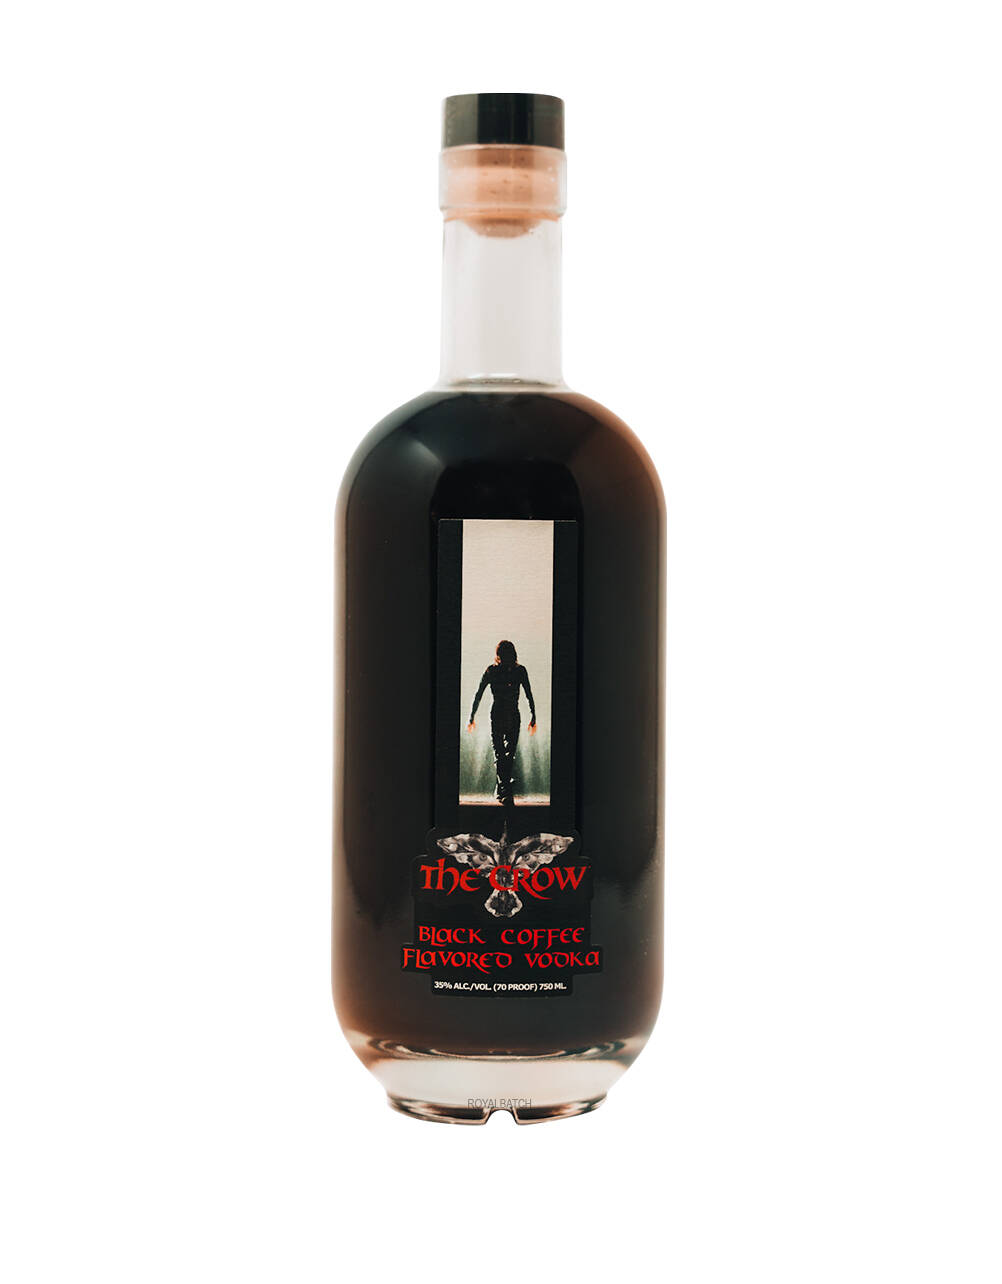 Tennessee Legend The Crow Black Coffee Flavored Vodka